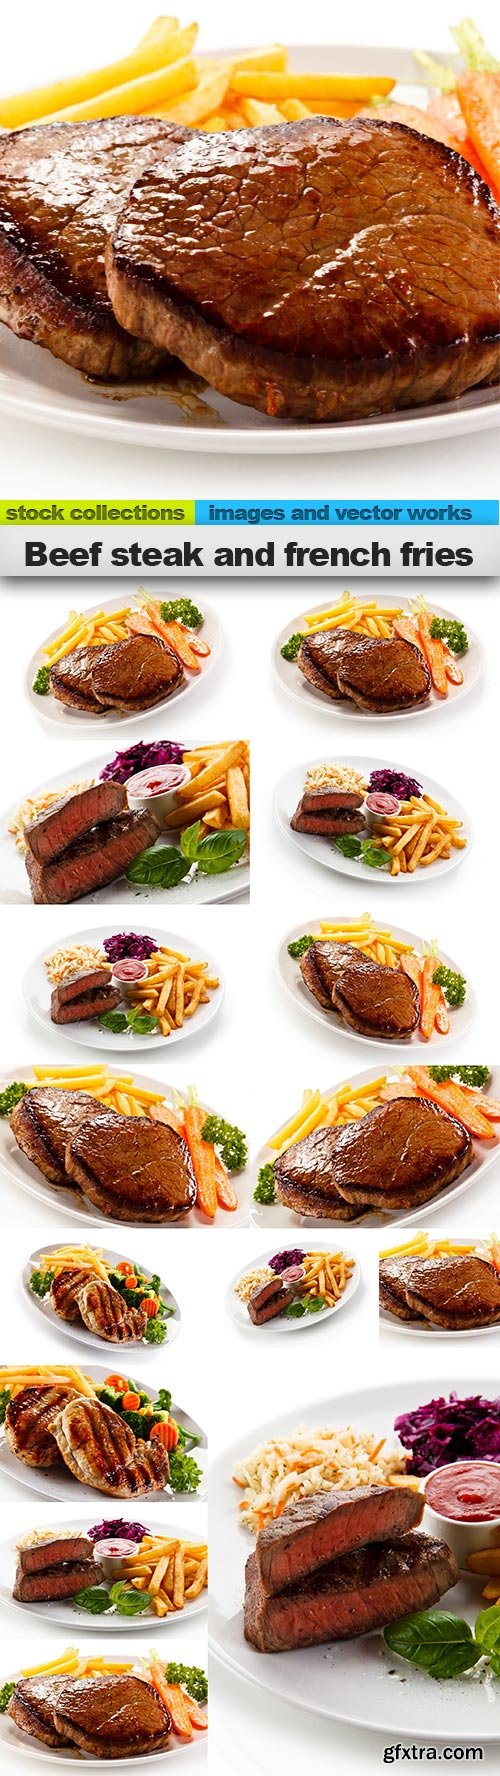 Beef steak and french fries, 15 x UHQ JPEG